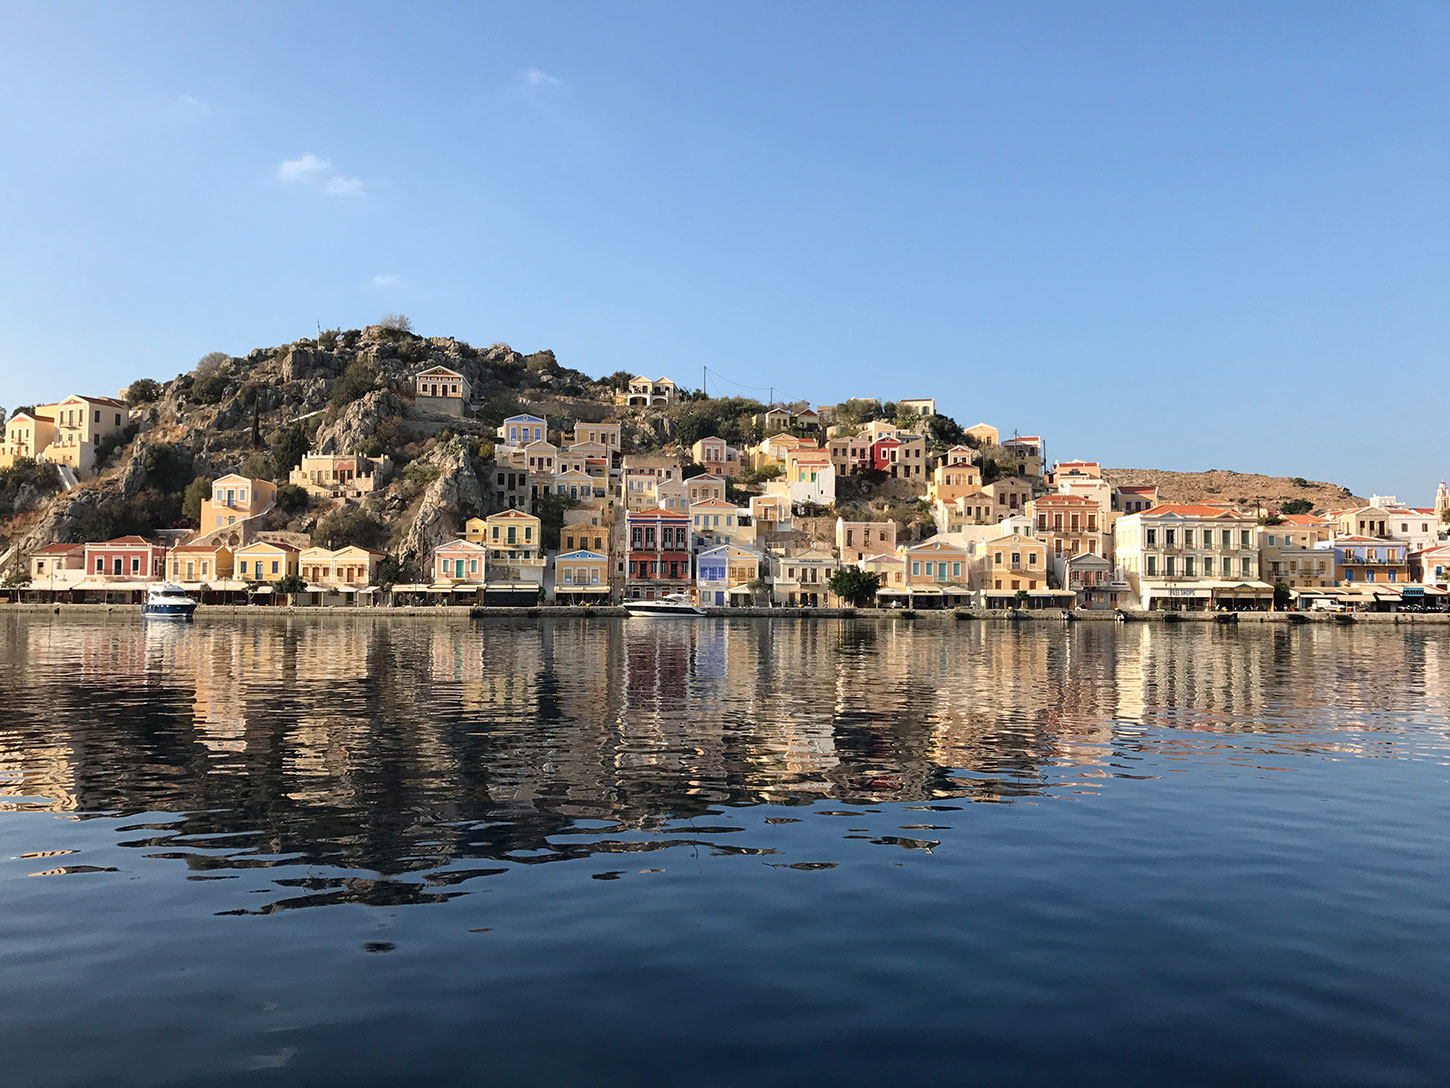 Symi houses around the port. The sea is calm and the sky is clear.